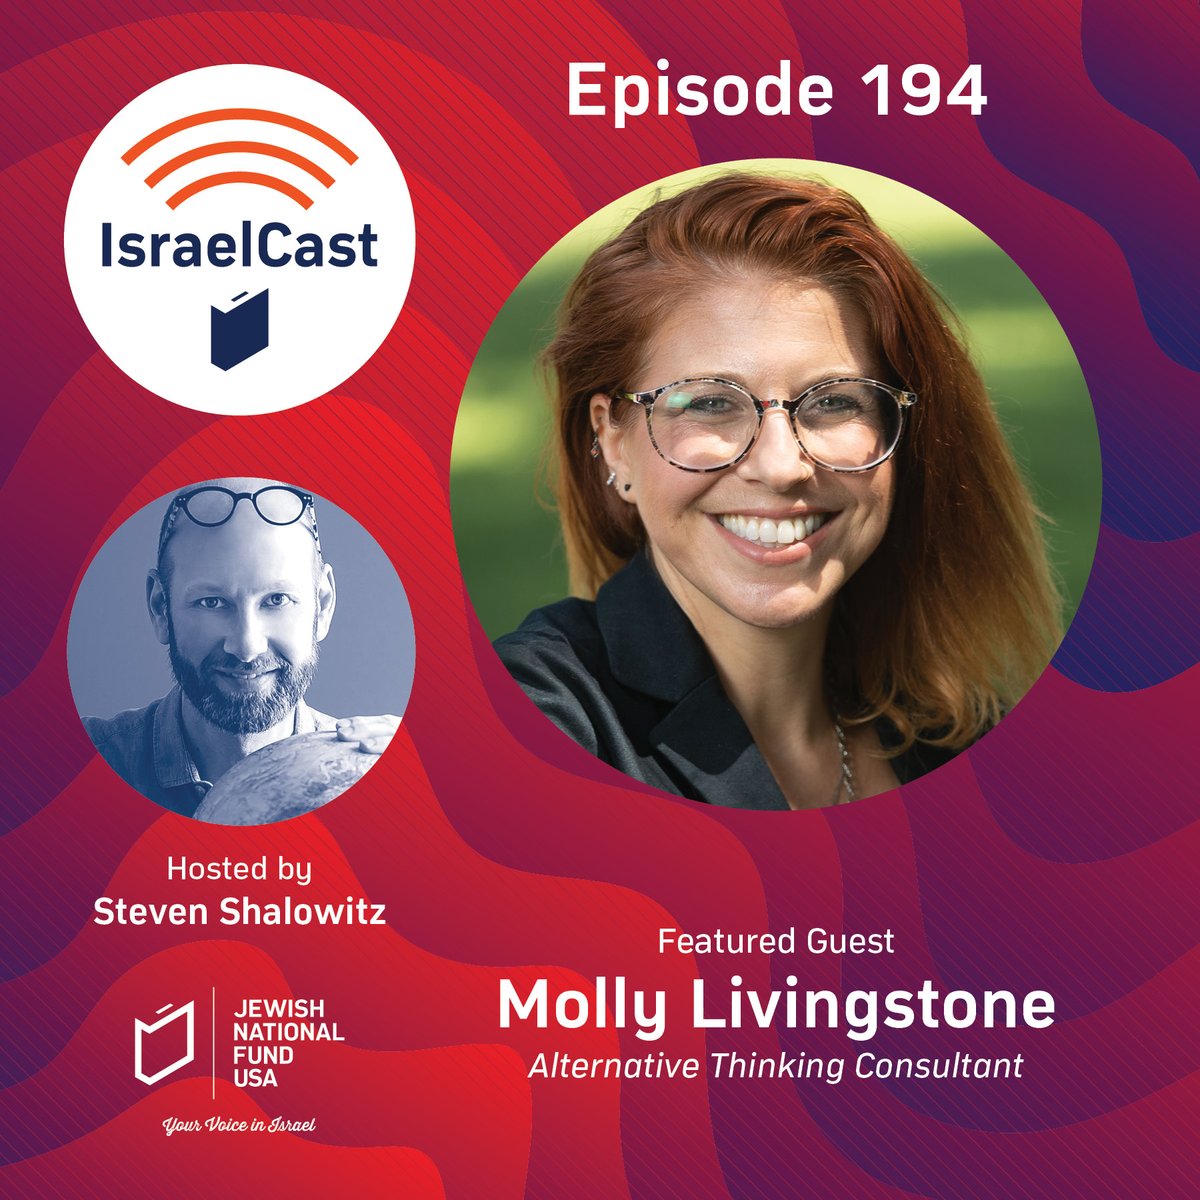 Listen to IsraelCast to hear Molly Livingstone discuss with host @stevenshalowitz how the attacks impacted Israel’s startup industry, how Israel’s innovators have responded, and several of her favorite ventures that she is a part of.

jnf.org/israelcast